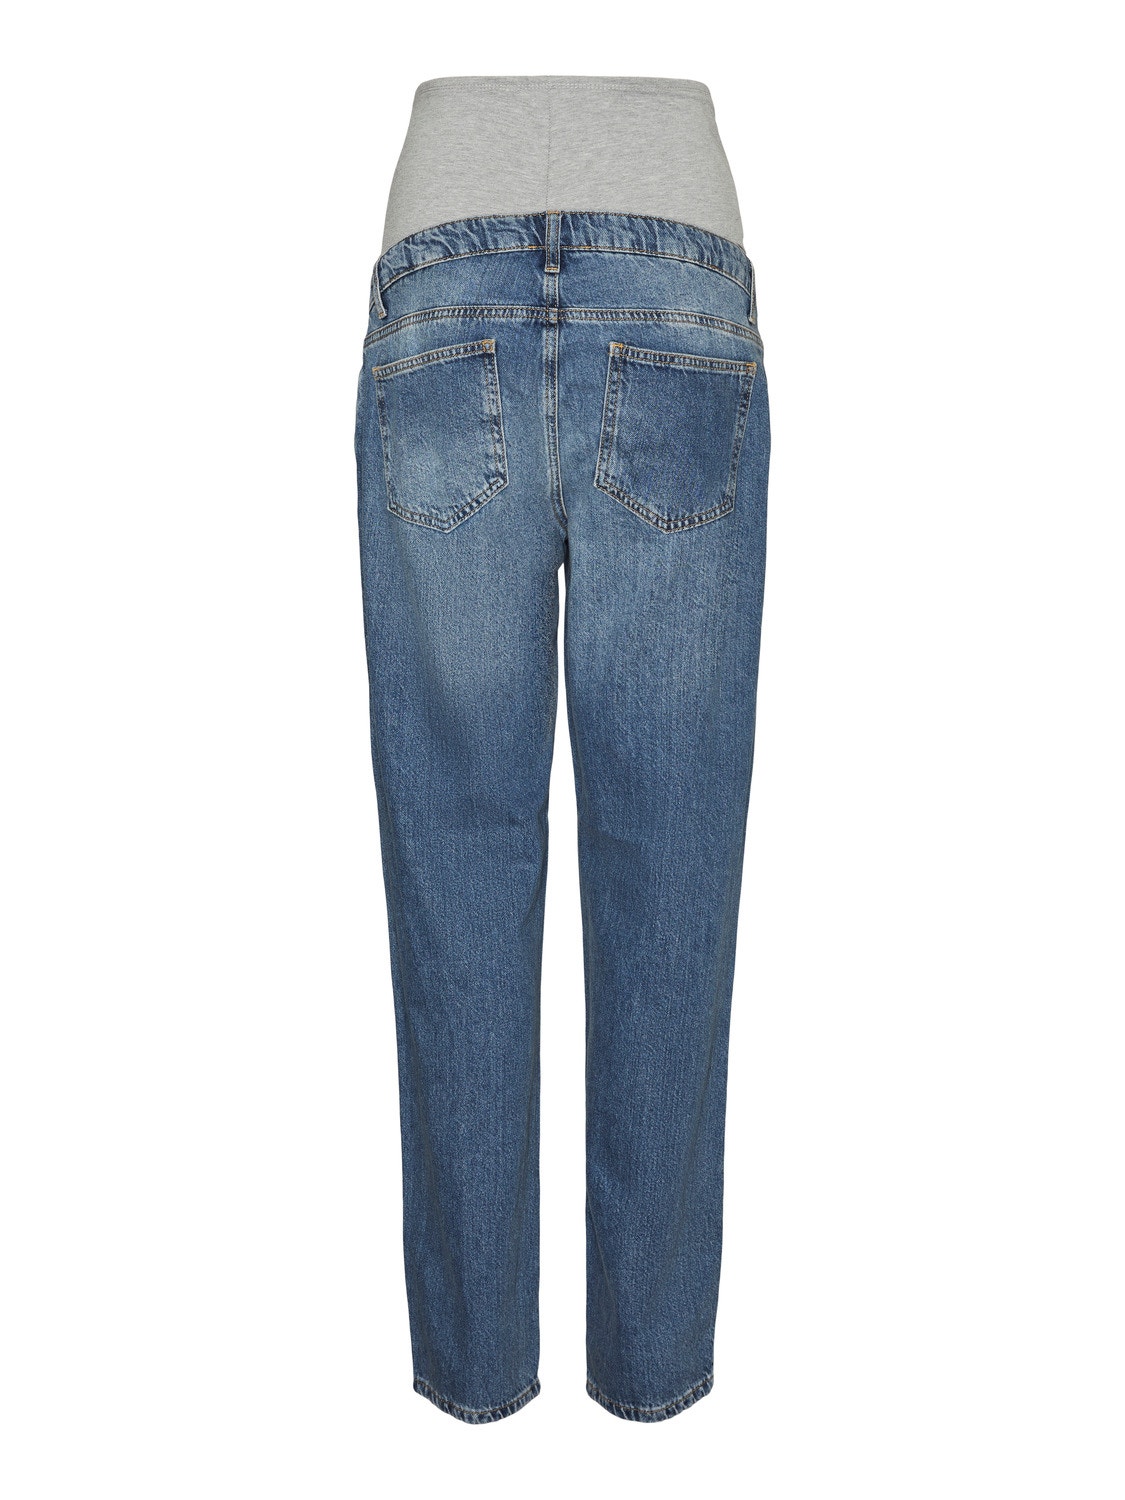 TopShop Maternity Mom Jeans for Women